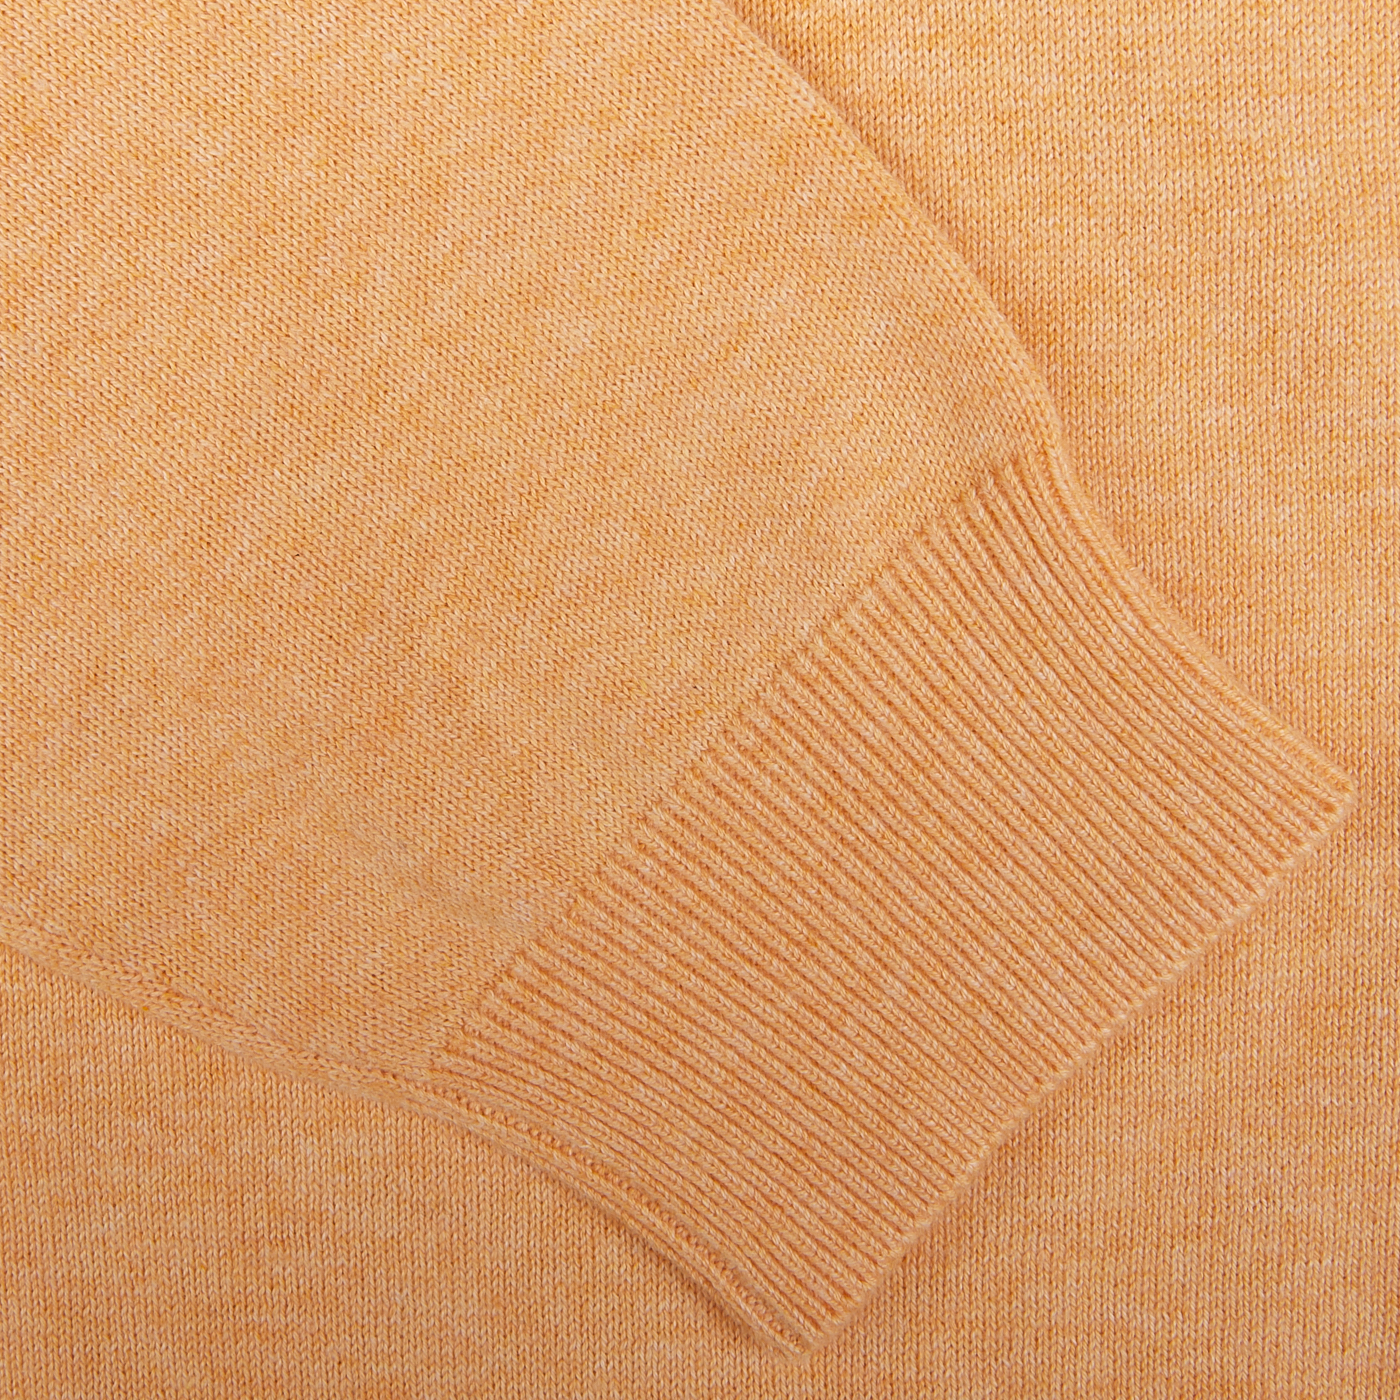 Close-up of an Alan Paine luxury cotton cashmere beige sweater showcasing the knitted pattern and ribbed cuff.